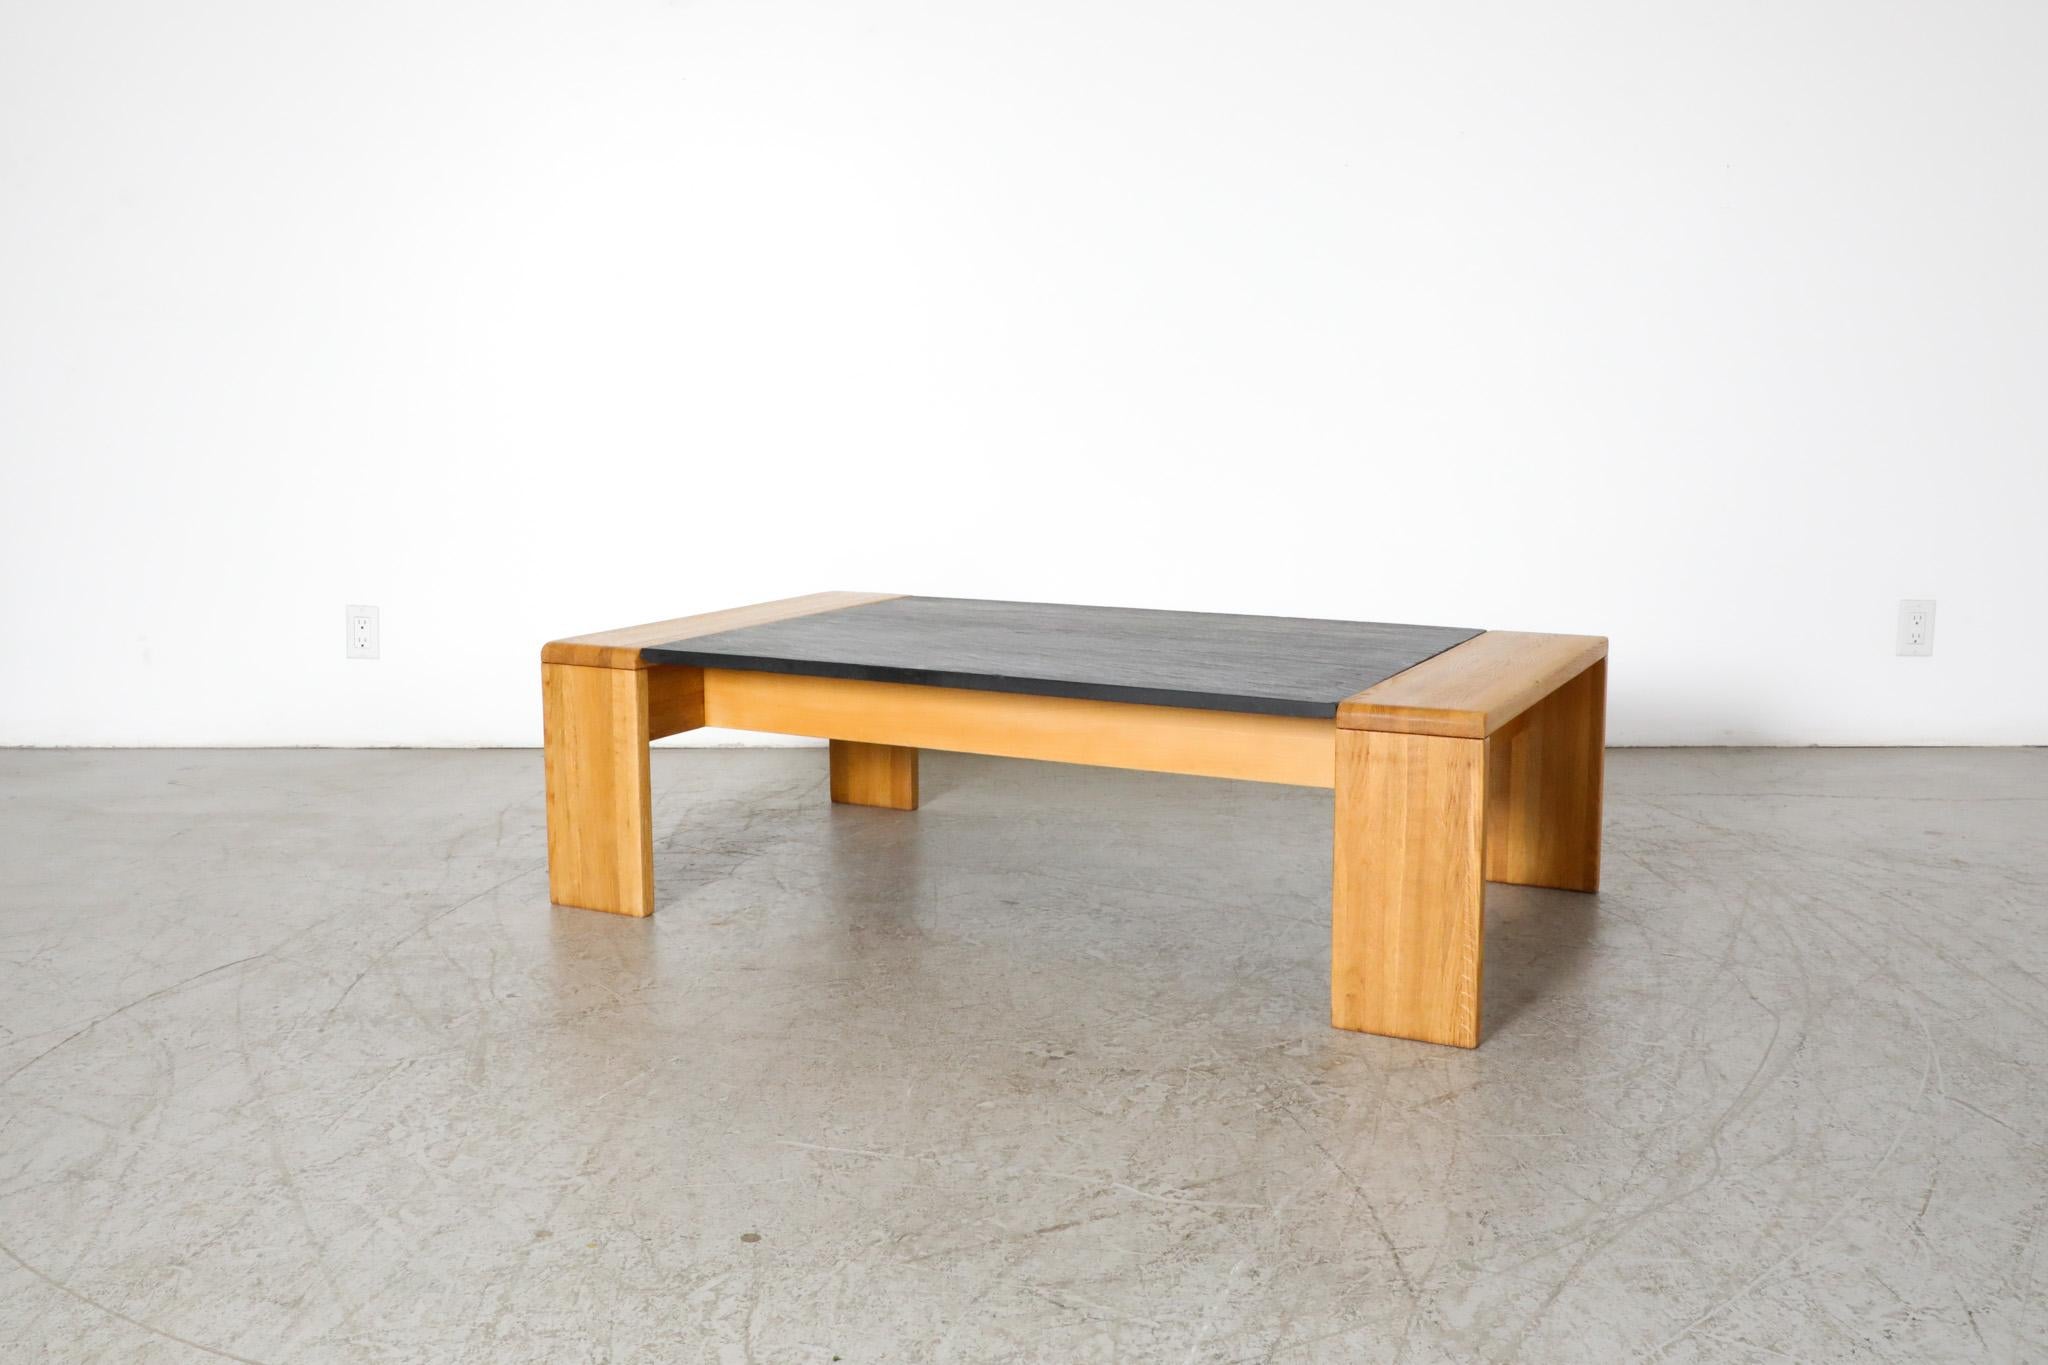 Dutch Tobia Scarpa Inspired Teak and Stone Coffee and side Table by Leolux